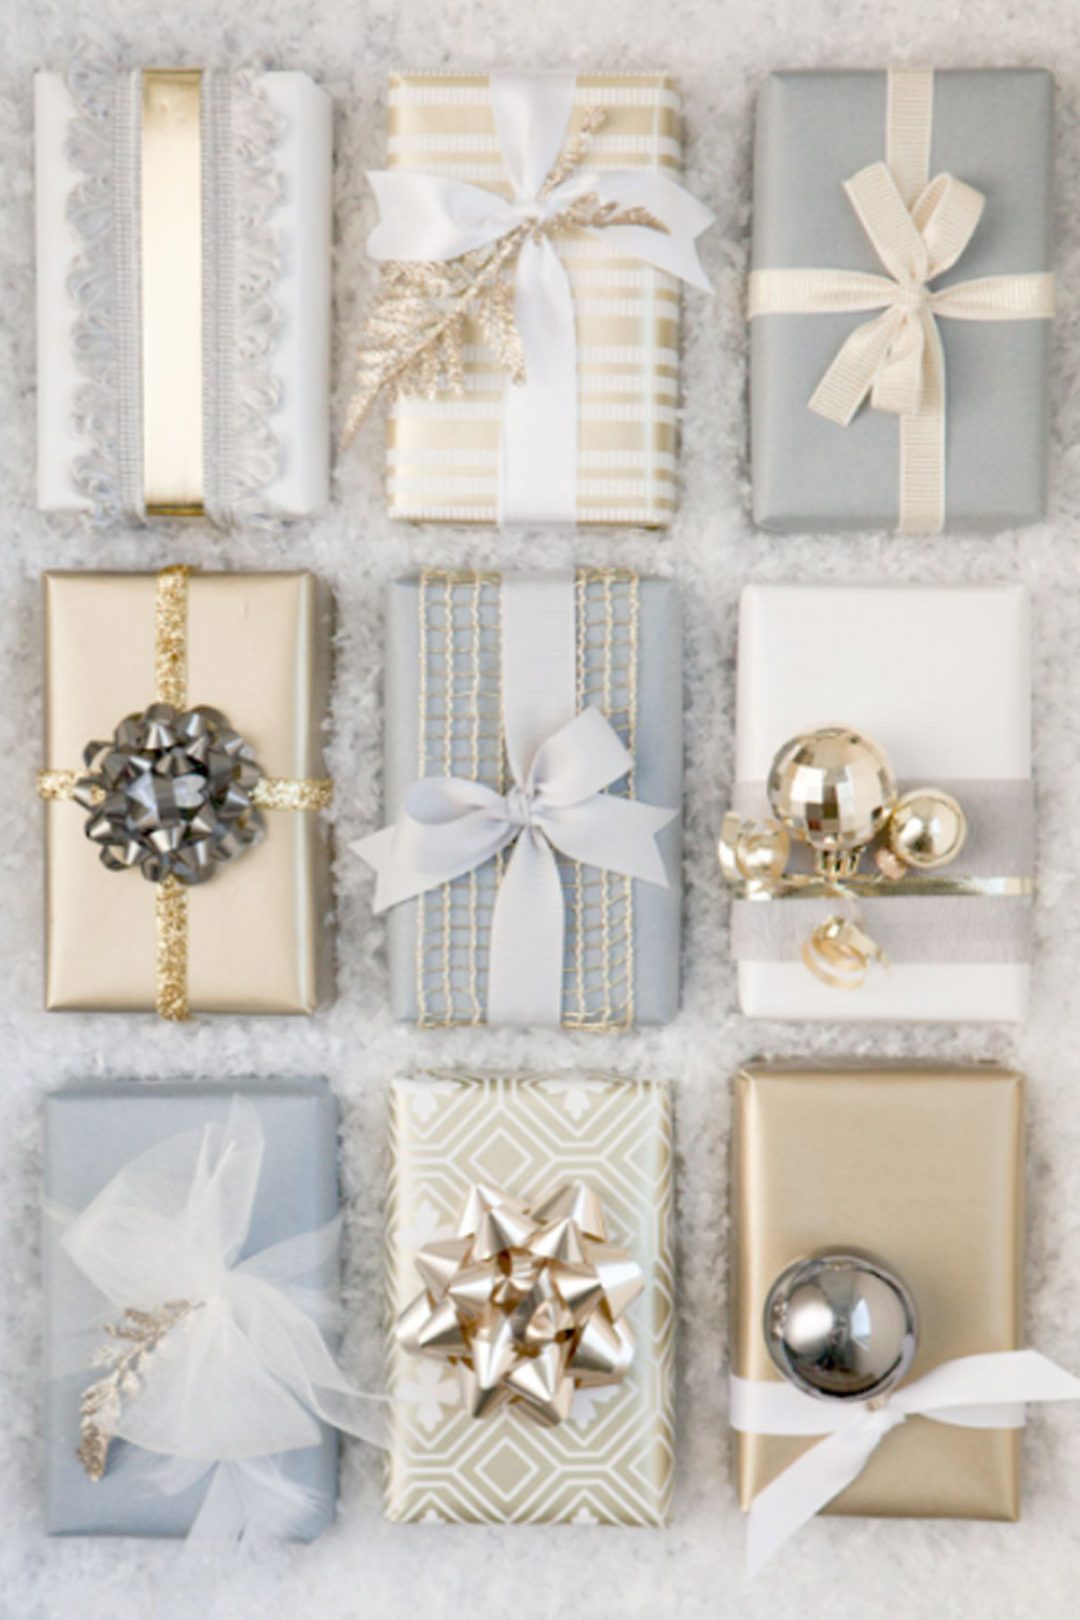 Wrapping paper decor and holiday decorations.